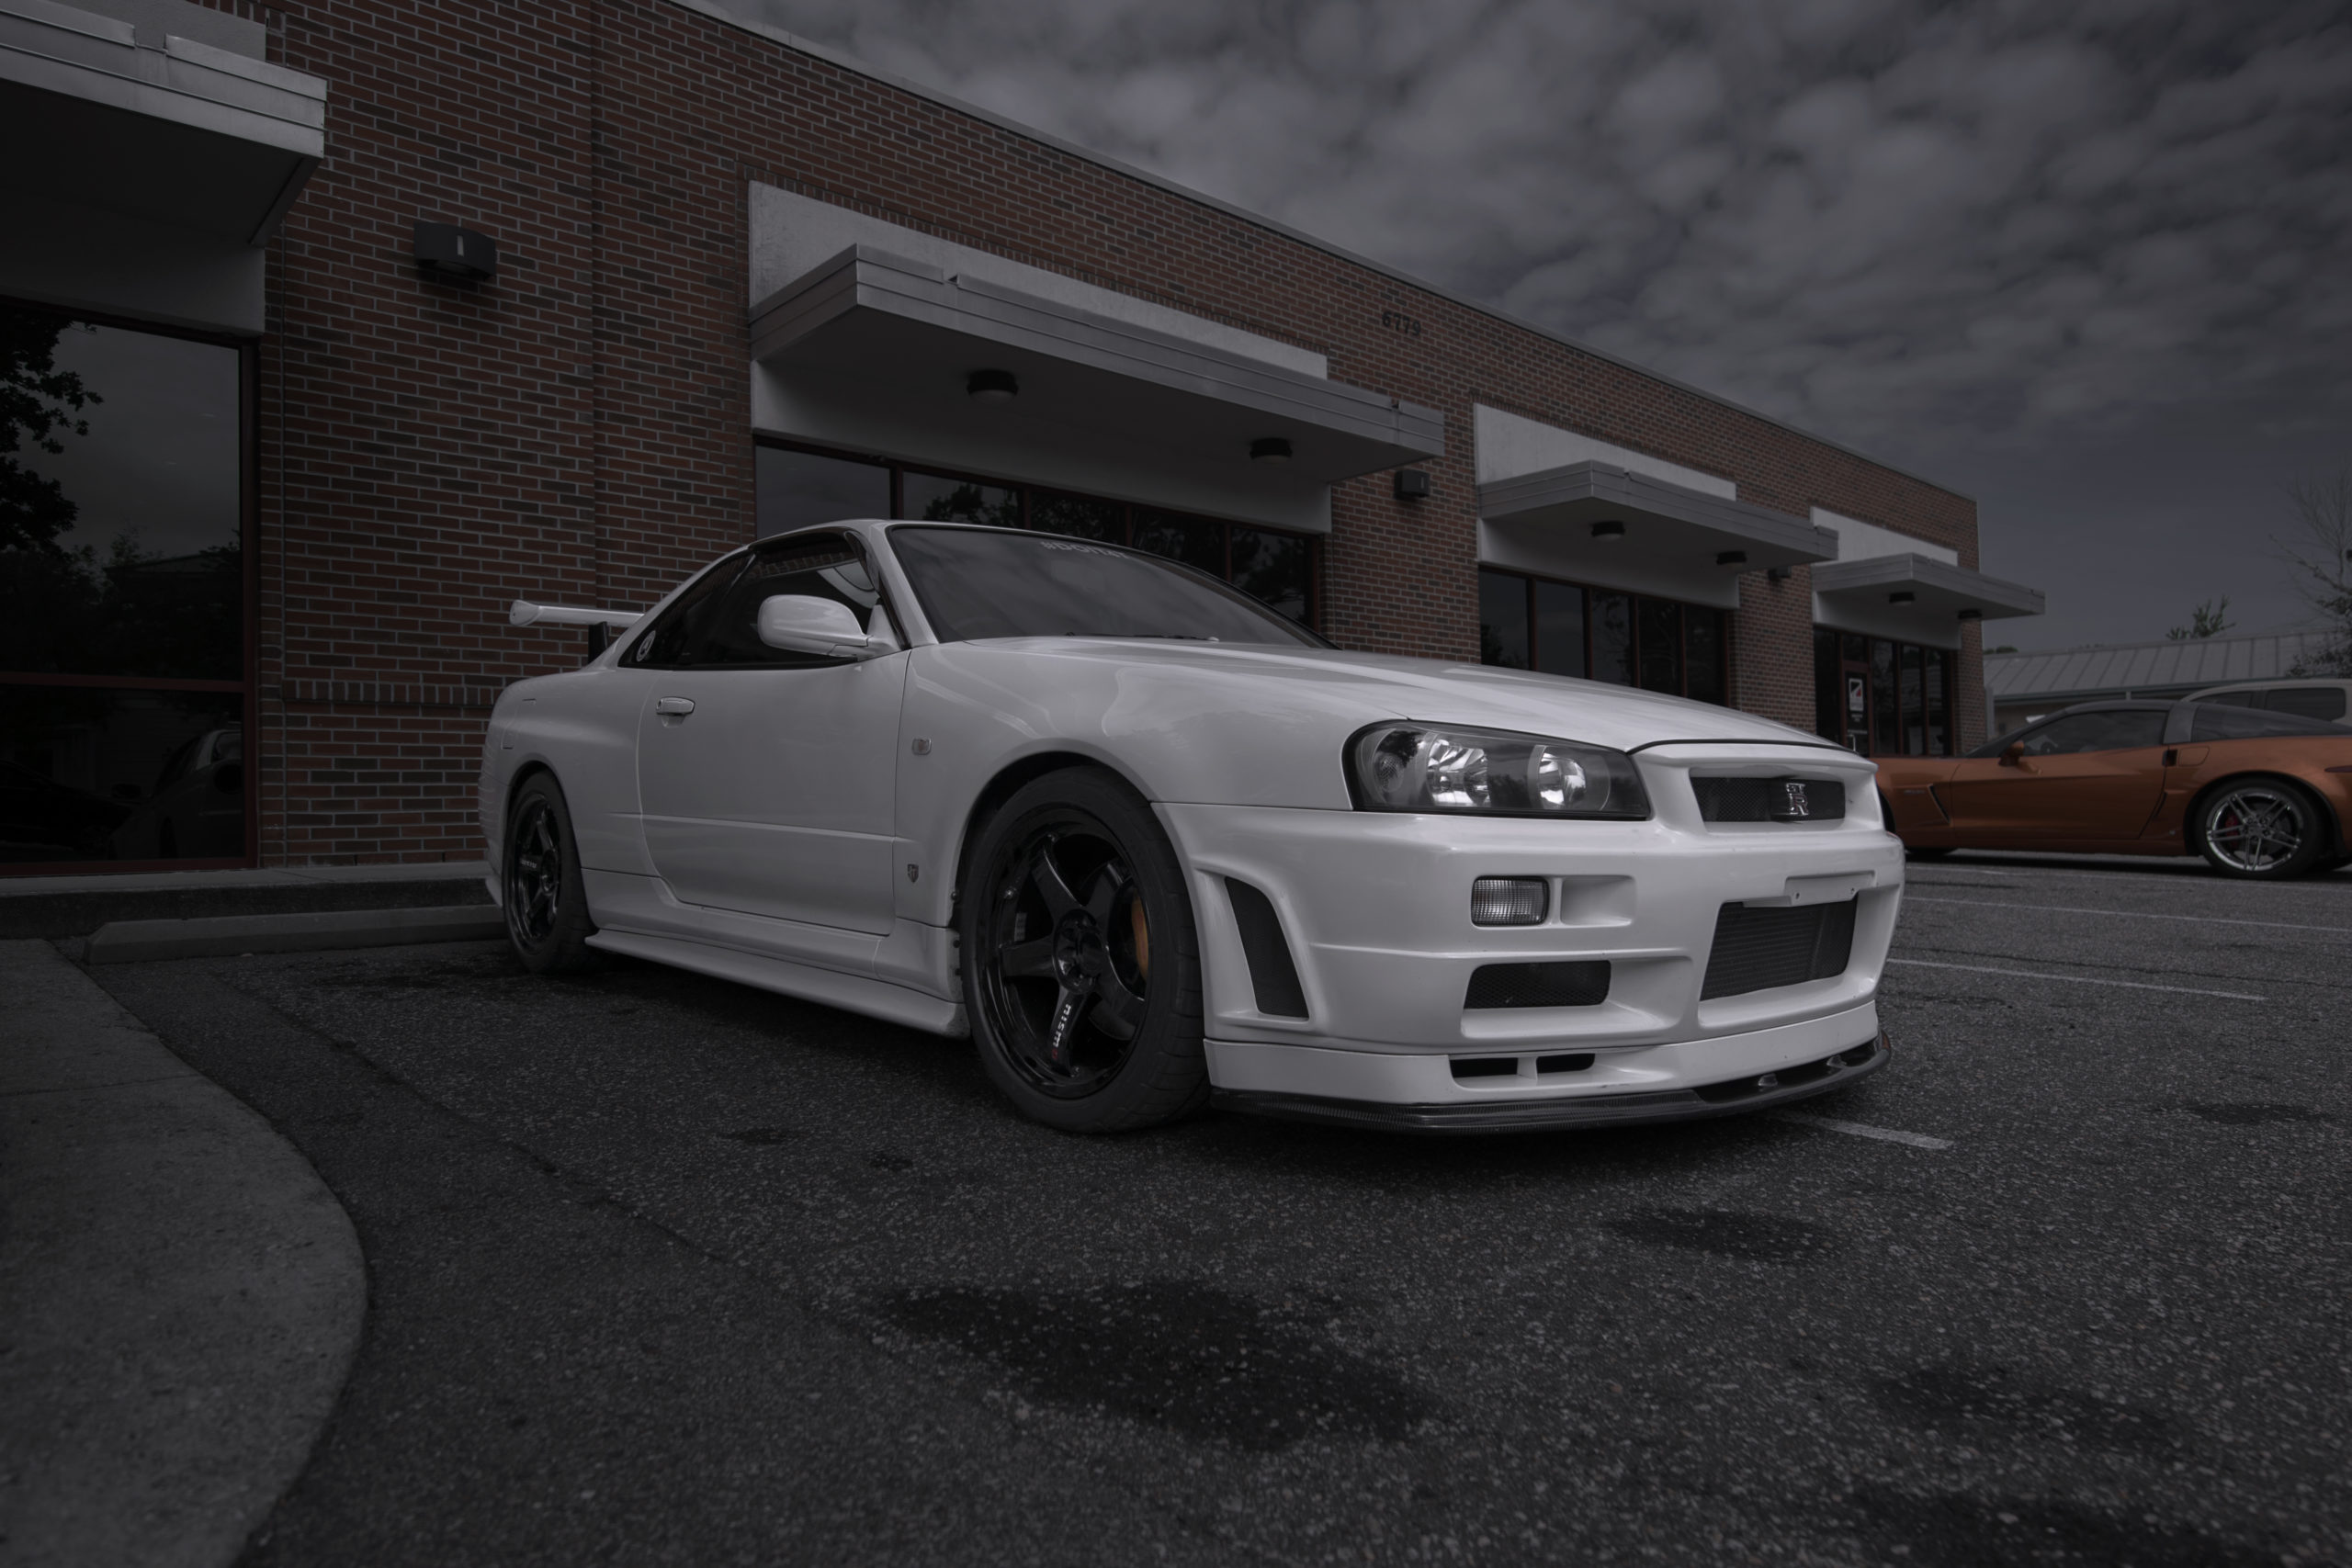 Is Anyone Going To Pay Over $450,000 For This 231-Mile Nissan Skyline R34 GT -R?, nissan skyline gtr r34 